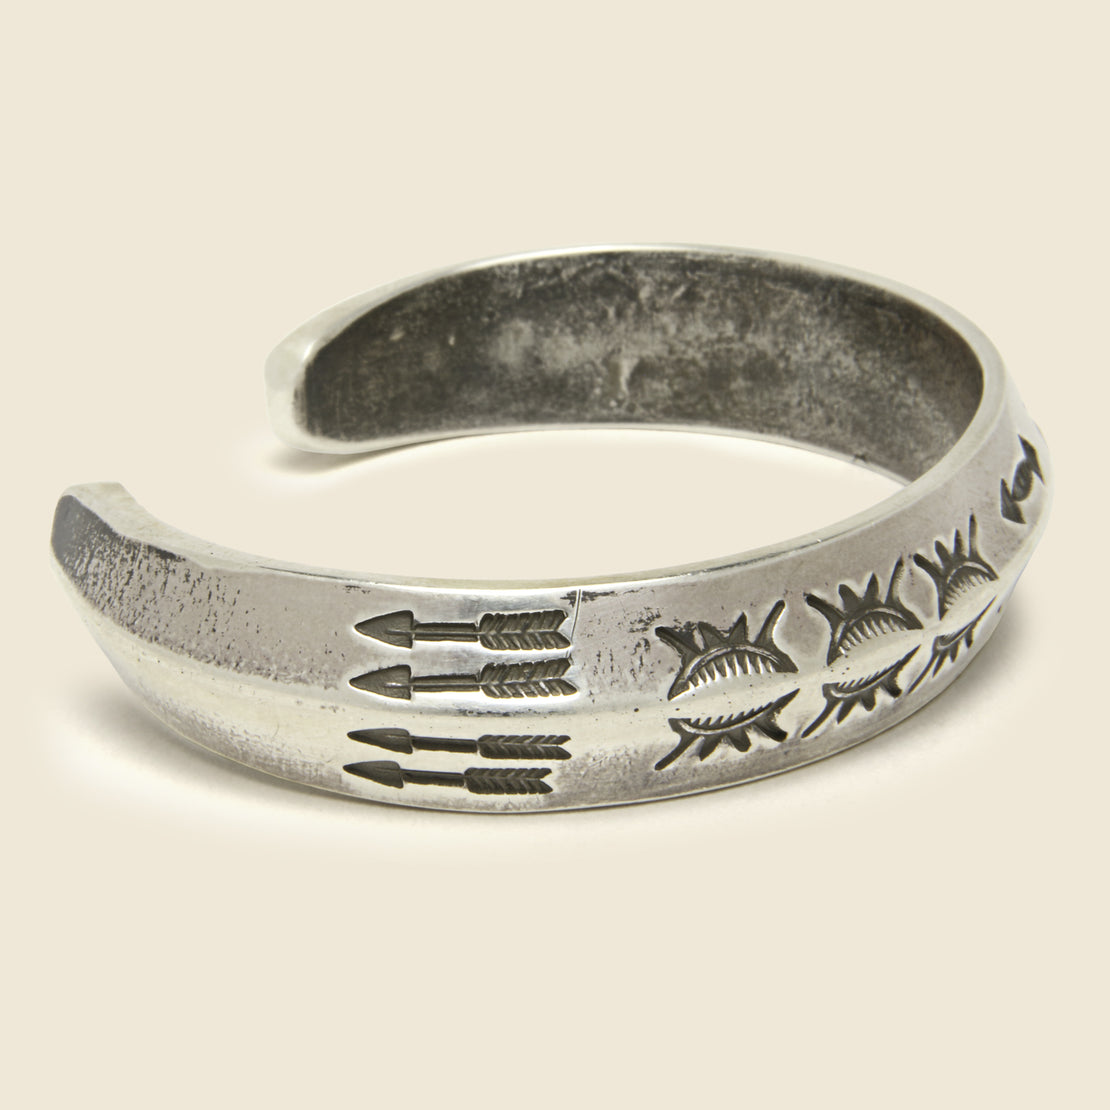 JDS - Women's Sunburst & Double Arrow Large Carney Cuff, SS21D, Silver - Jonathan Day Silversmith - STAG Provisions - W - One & Done - Accessories & Jewelry